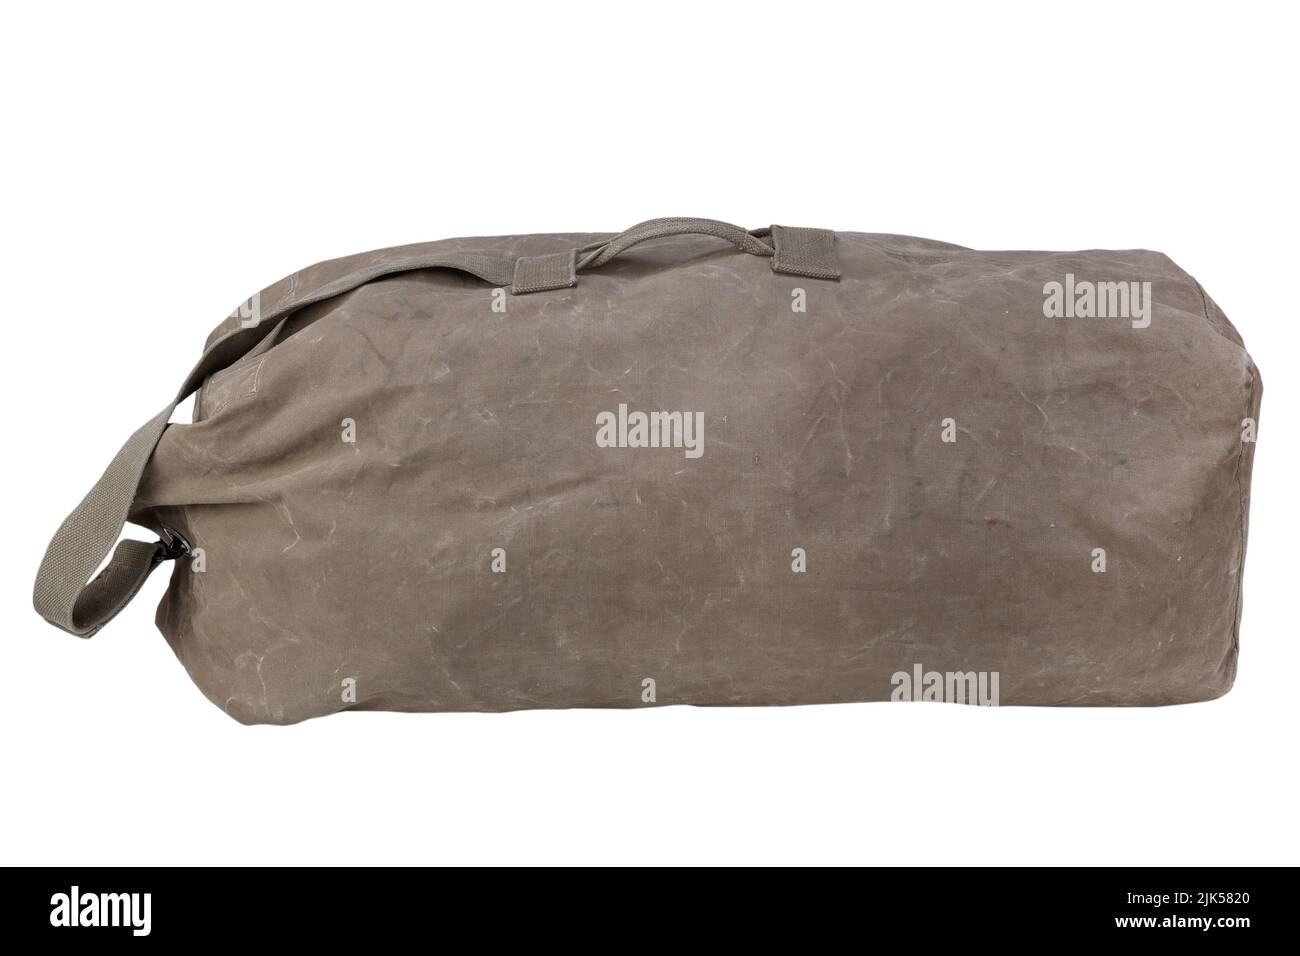 army issued duffel bag isolated on white background Stock Photo